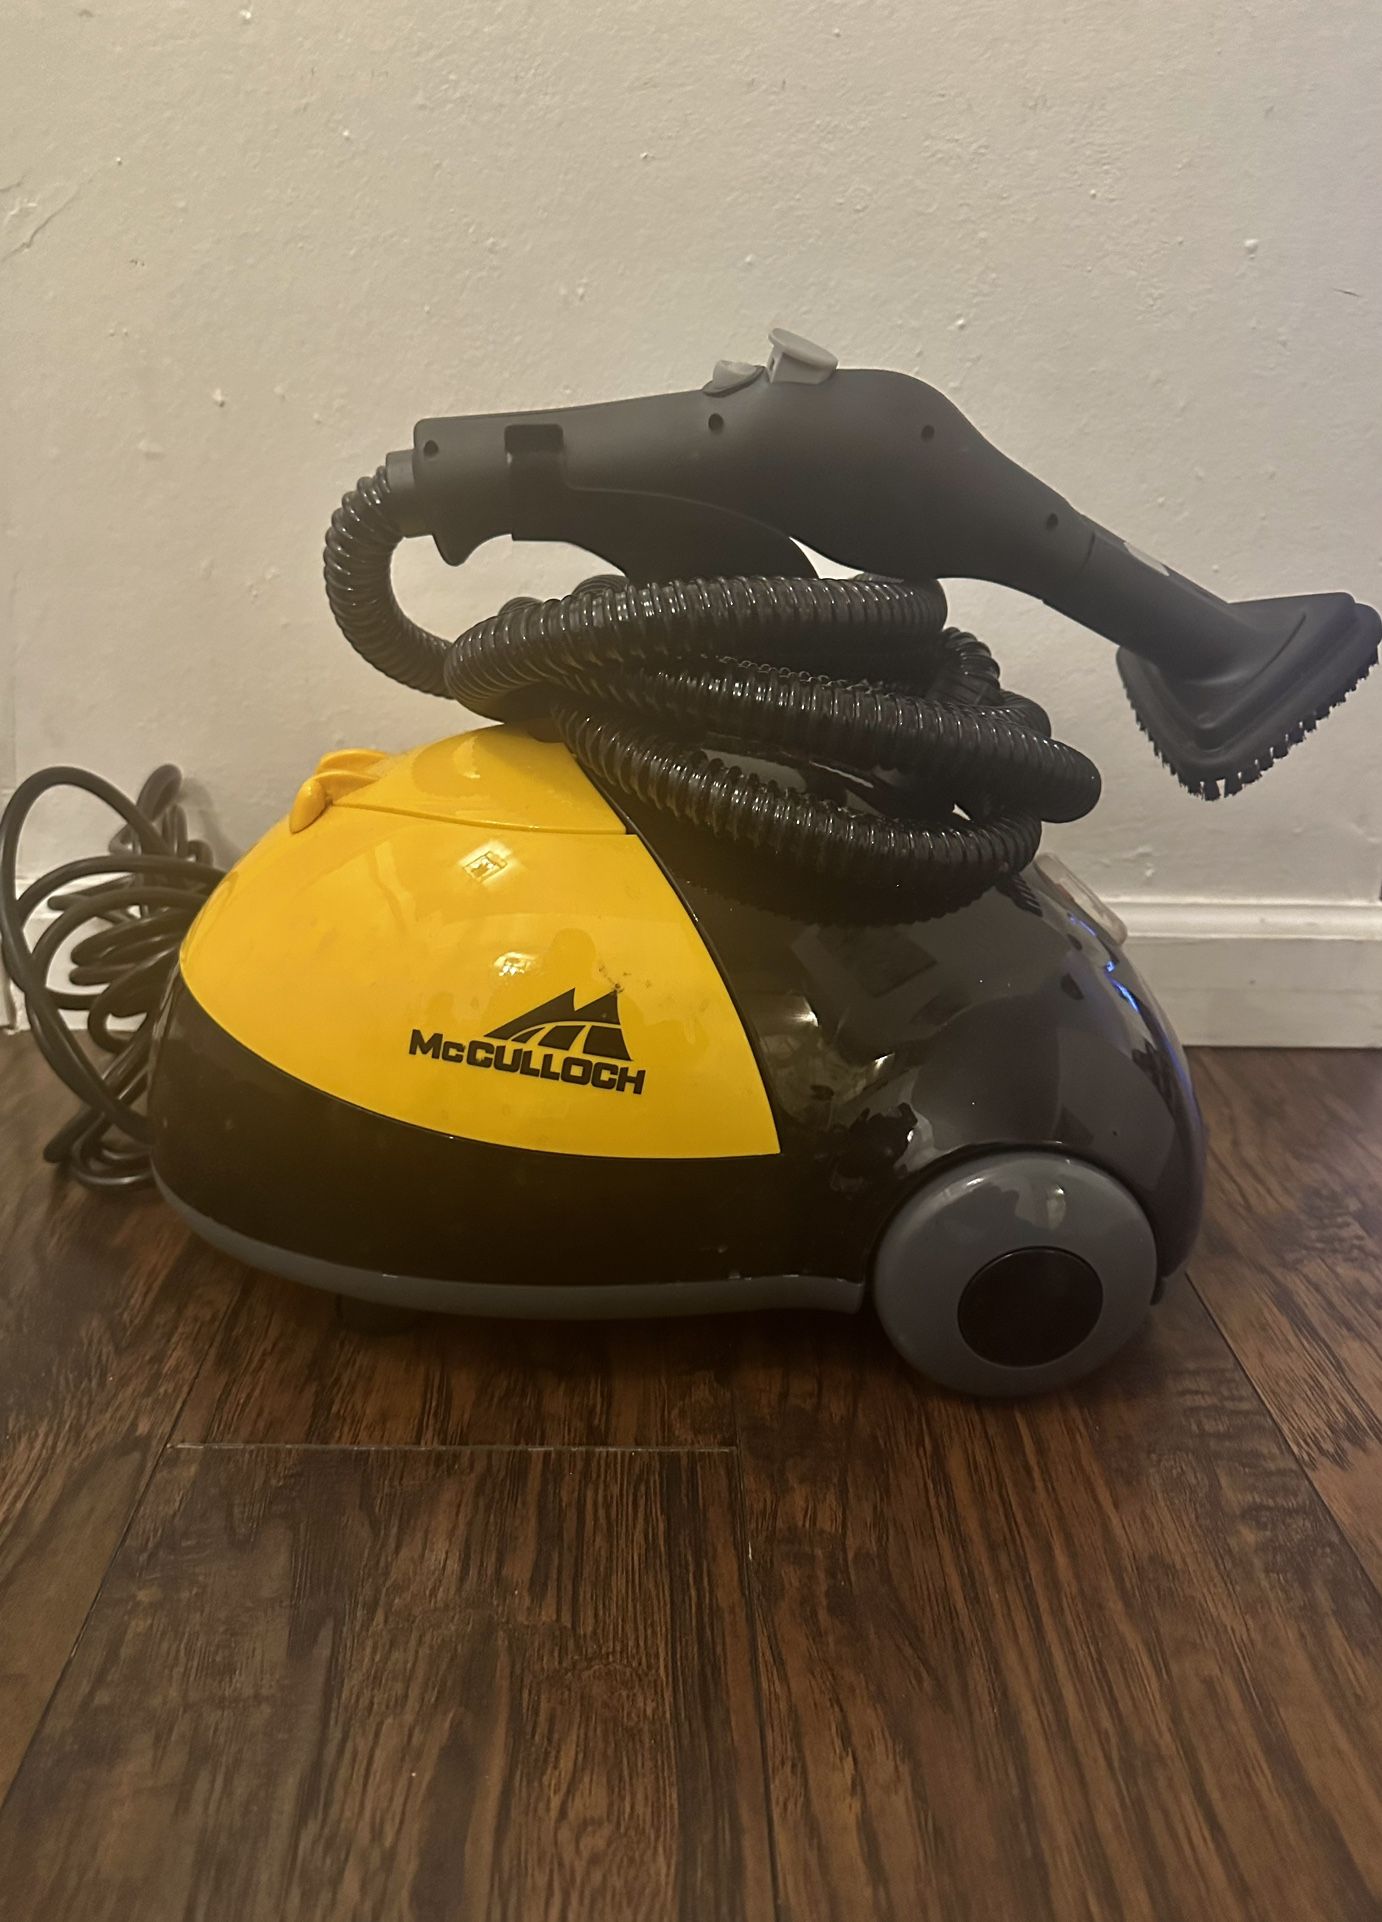 Mcculloch Steam Cleaner